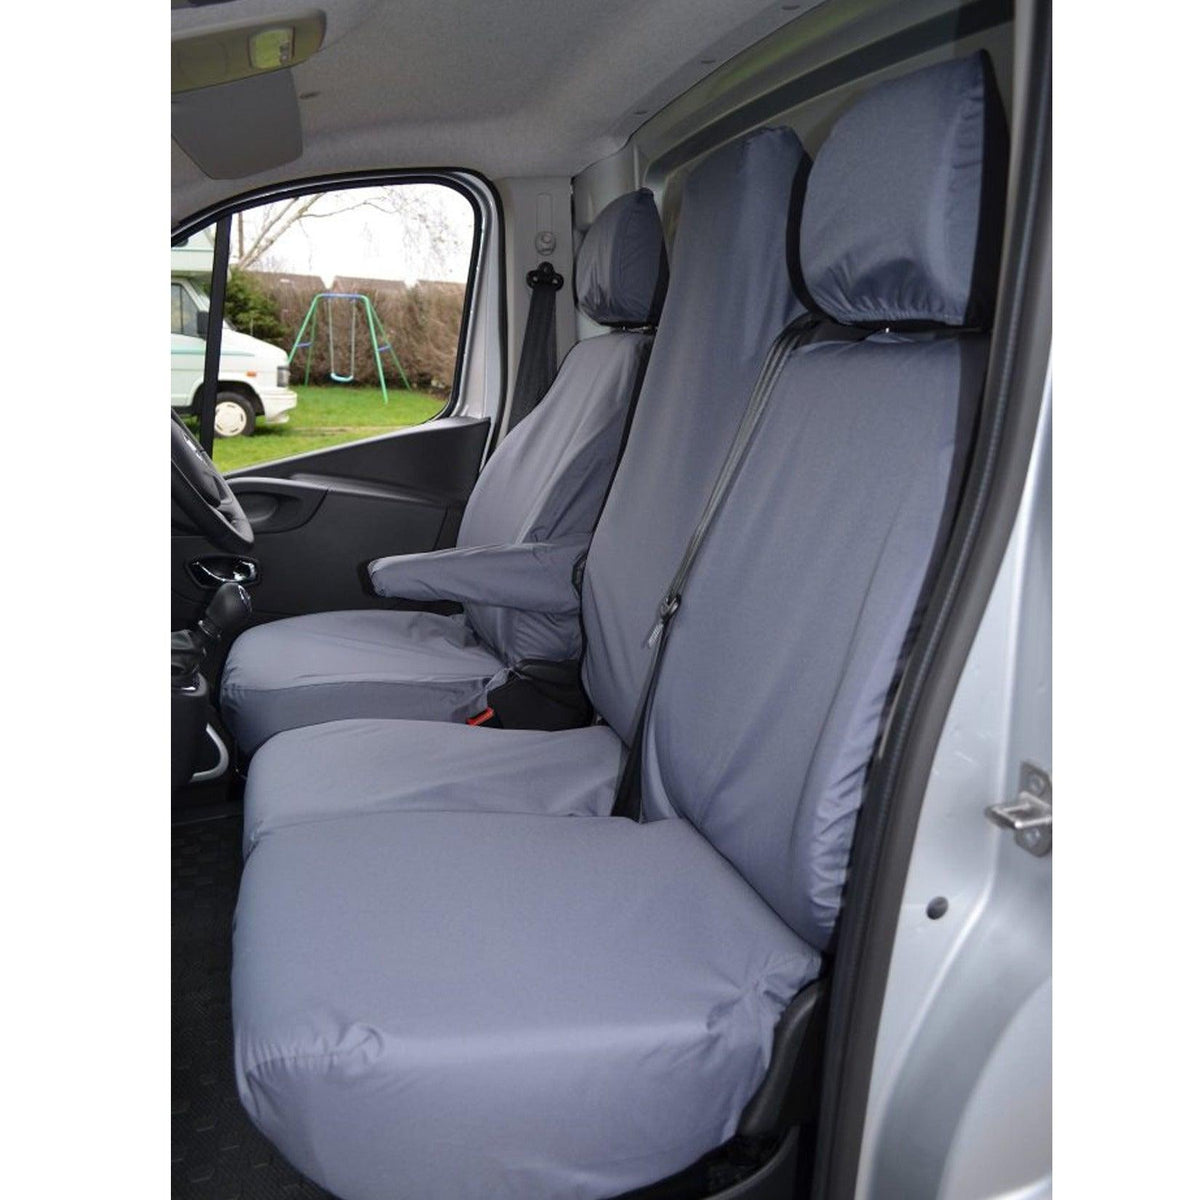 VAUXHALL VIVARO 2014-2019 SPORTIVE DRIVER AND FRONT DOUBLE FOLDING PASSENGER SEAT COVERS - GREY - Storm Xccessories2